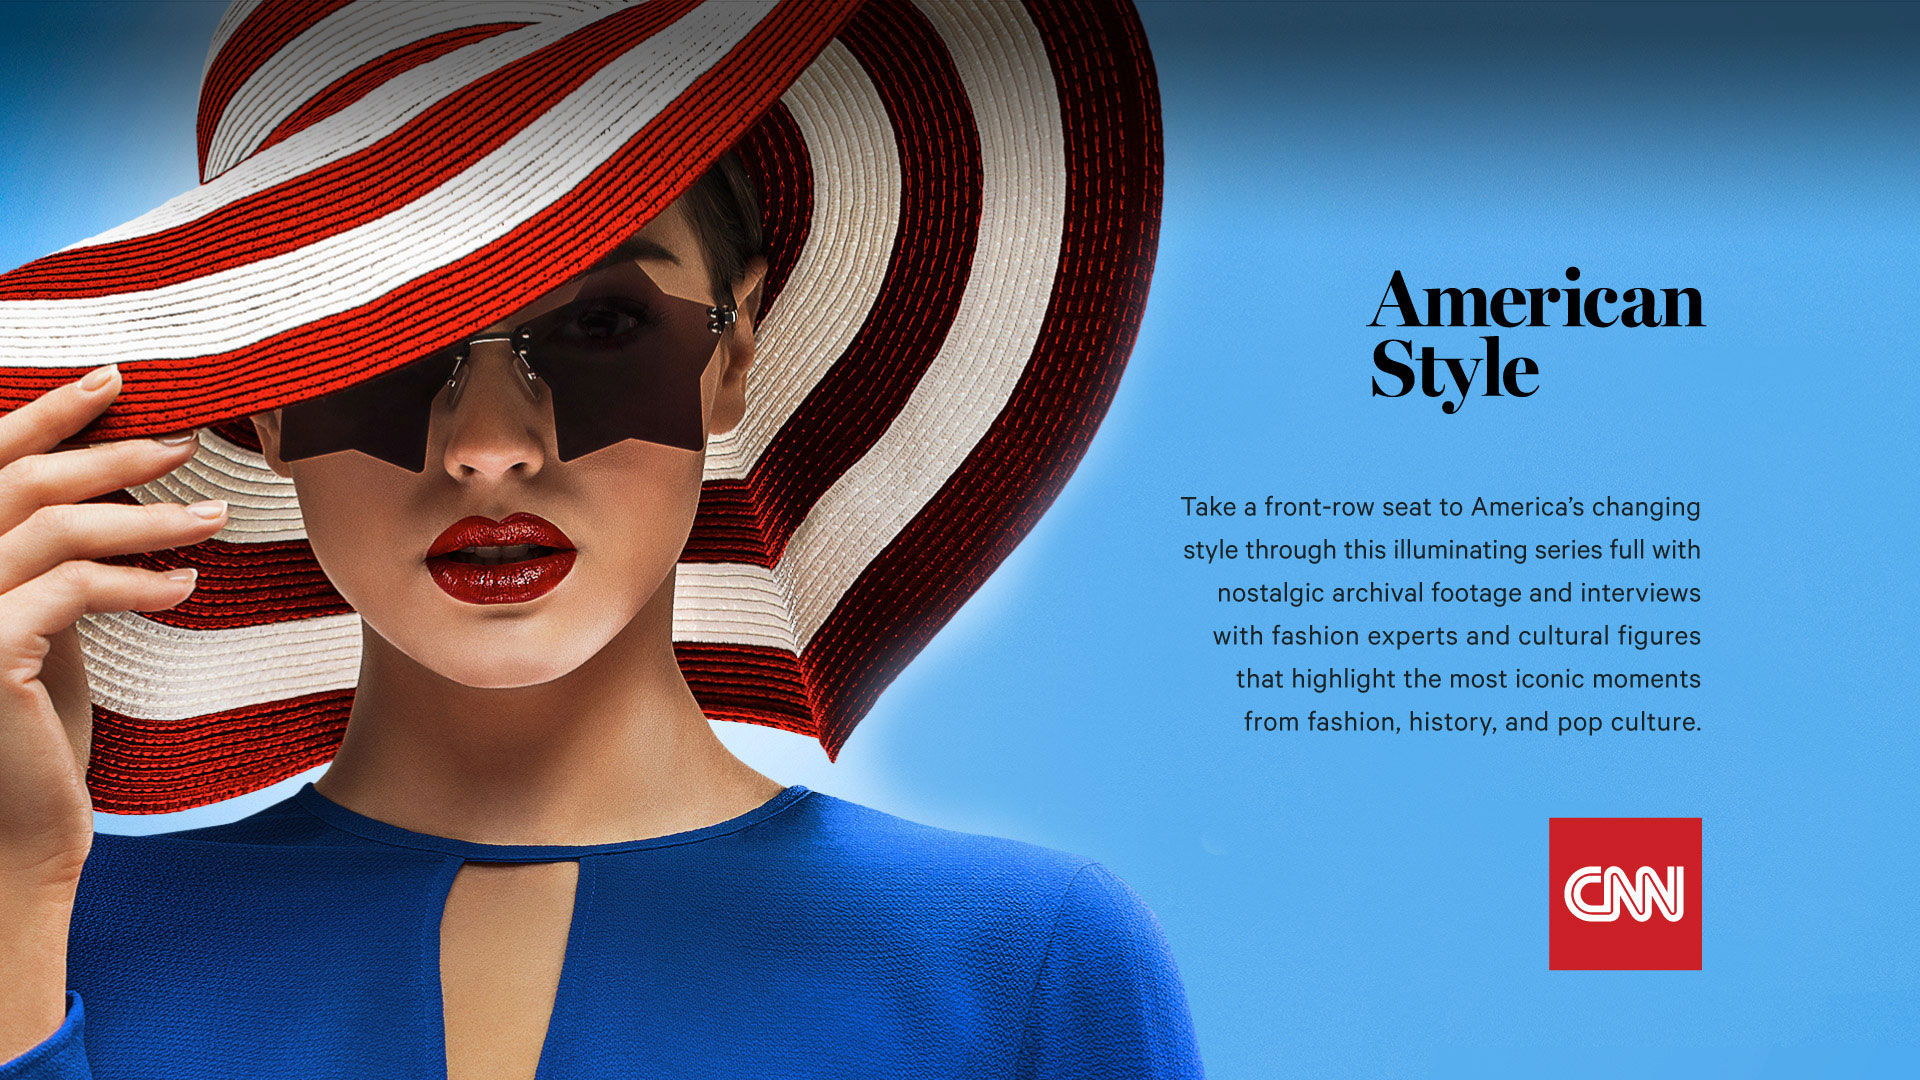 woman-wearing-and-holding-rim-of-red-and-white-striped-hat-and-star-sunglasses-red-lipstick-blue-top-american-style-logo-cnn-logo